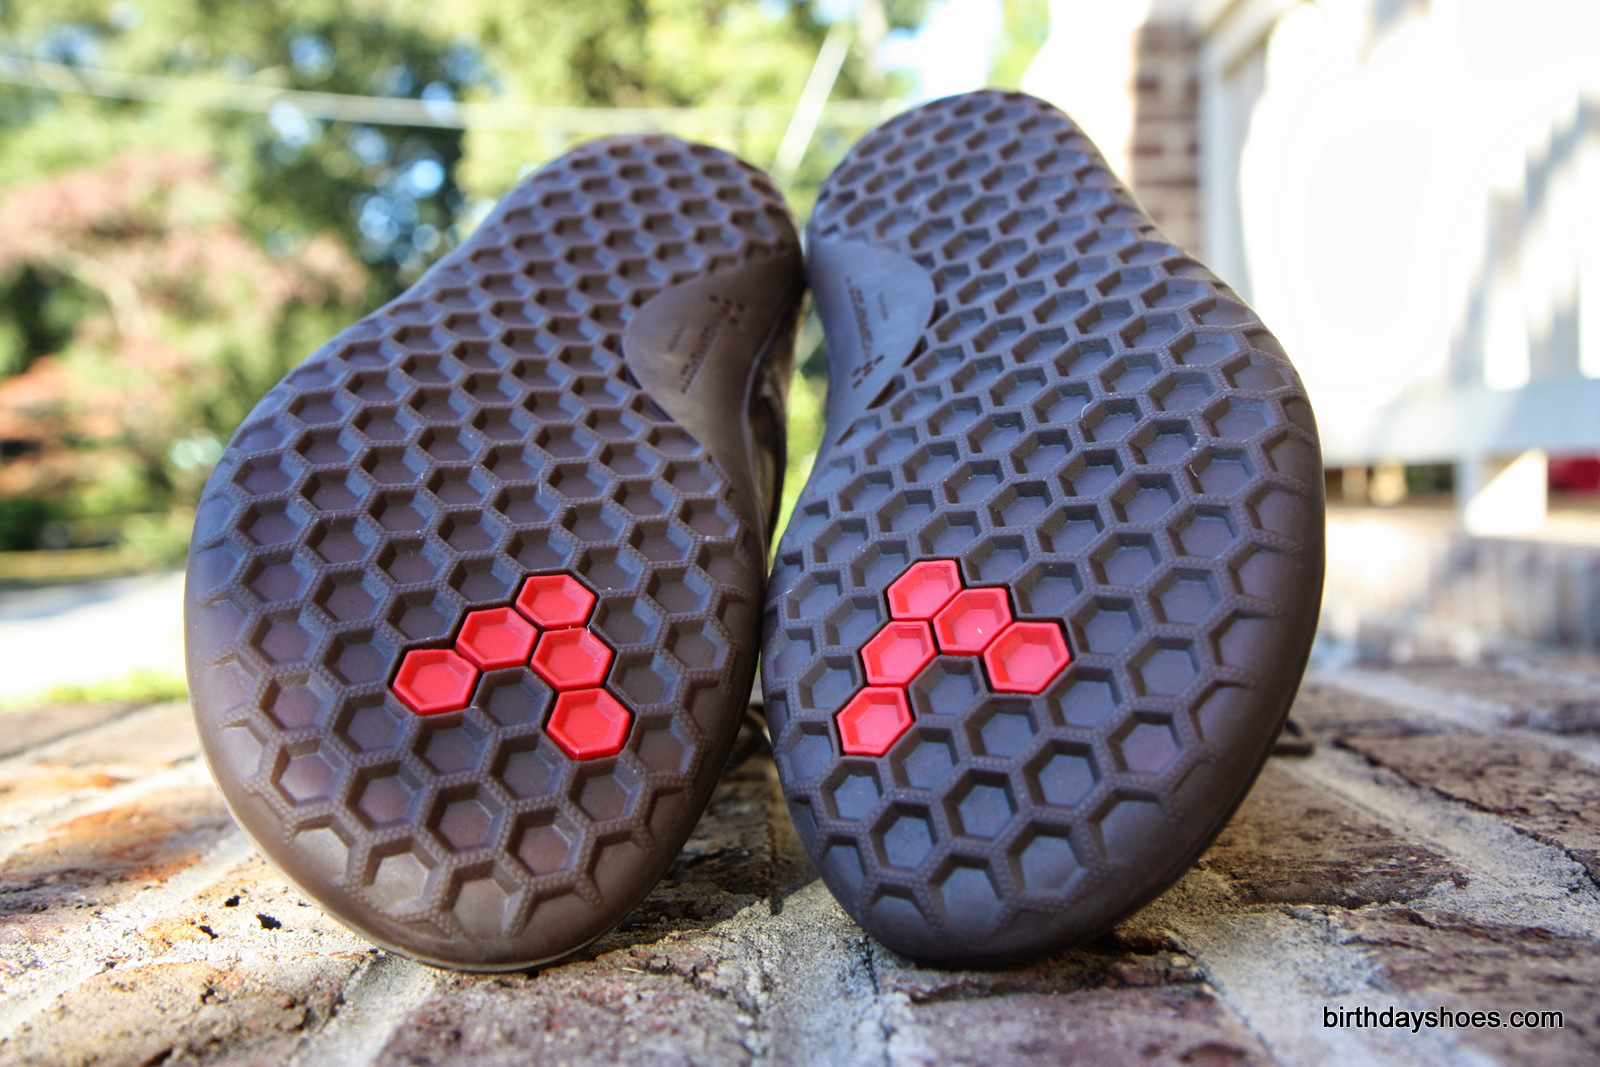 The Vivo Barefoot Scott has a 4mm thick, concave hexagonal rubber sole.